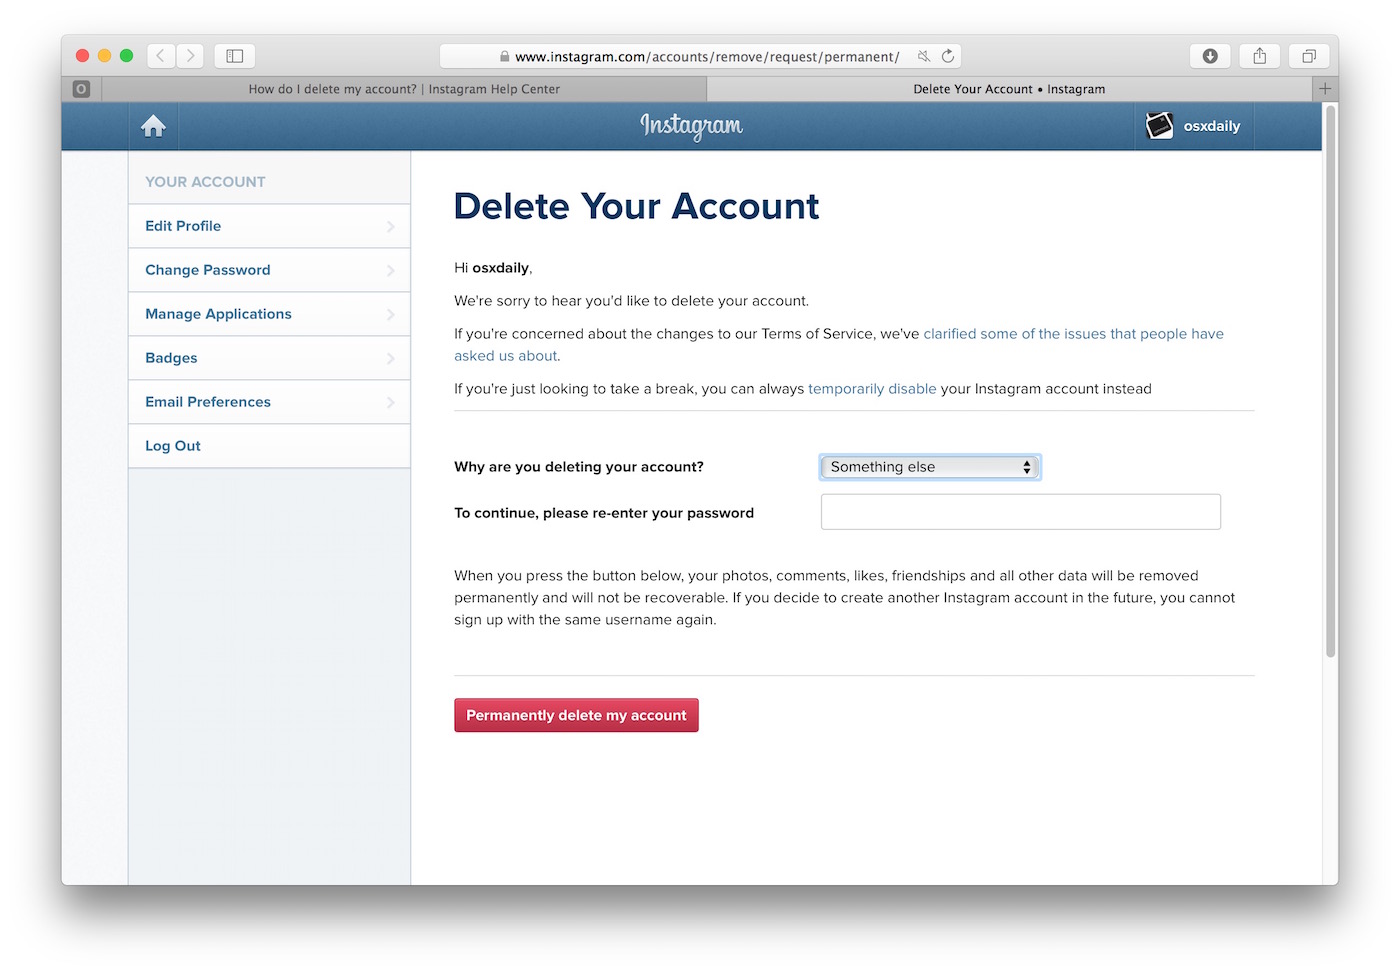 How to Delete an Instagram Account Permanently